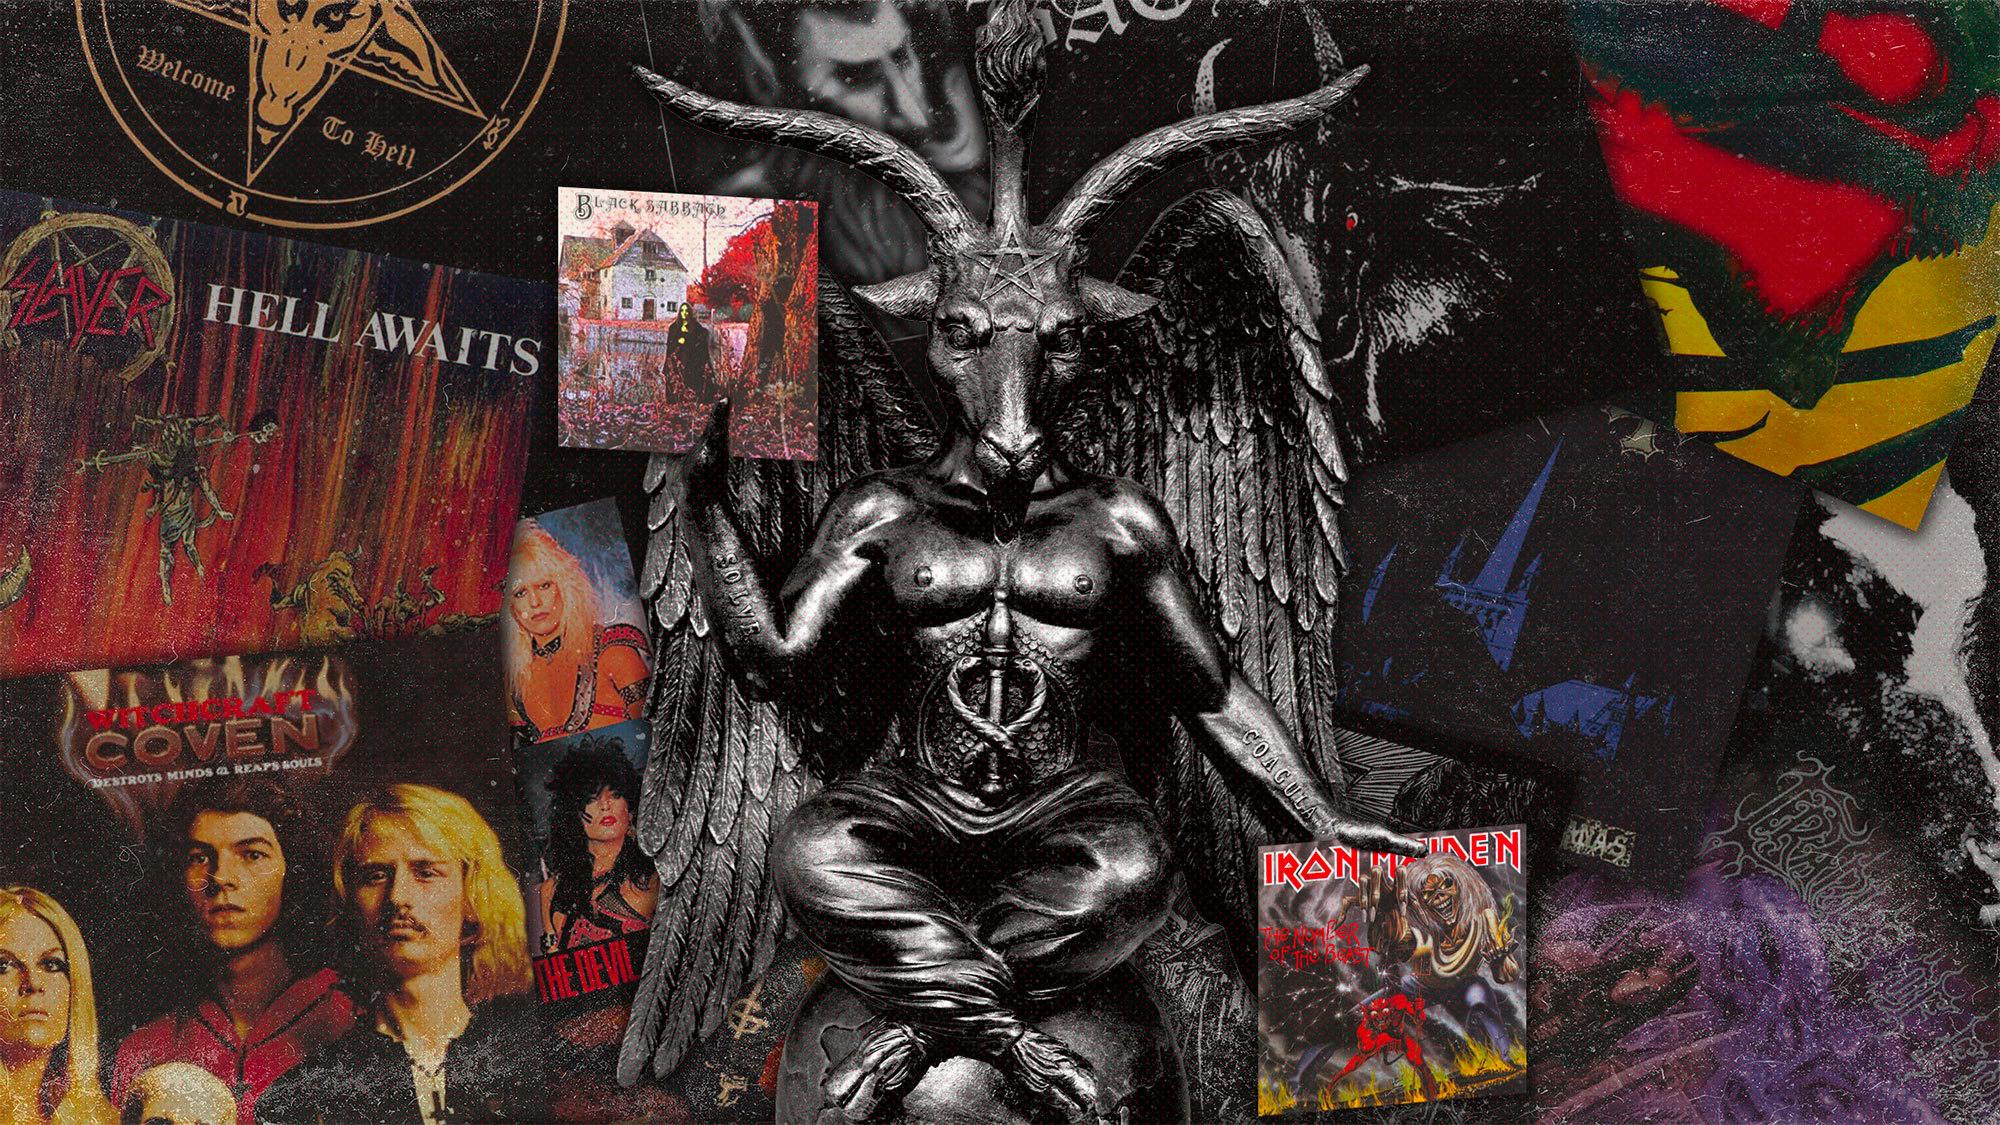 Shout At The Devil: A brief history of Satan in rock music